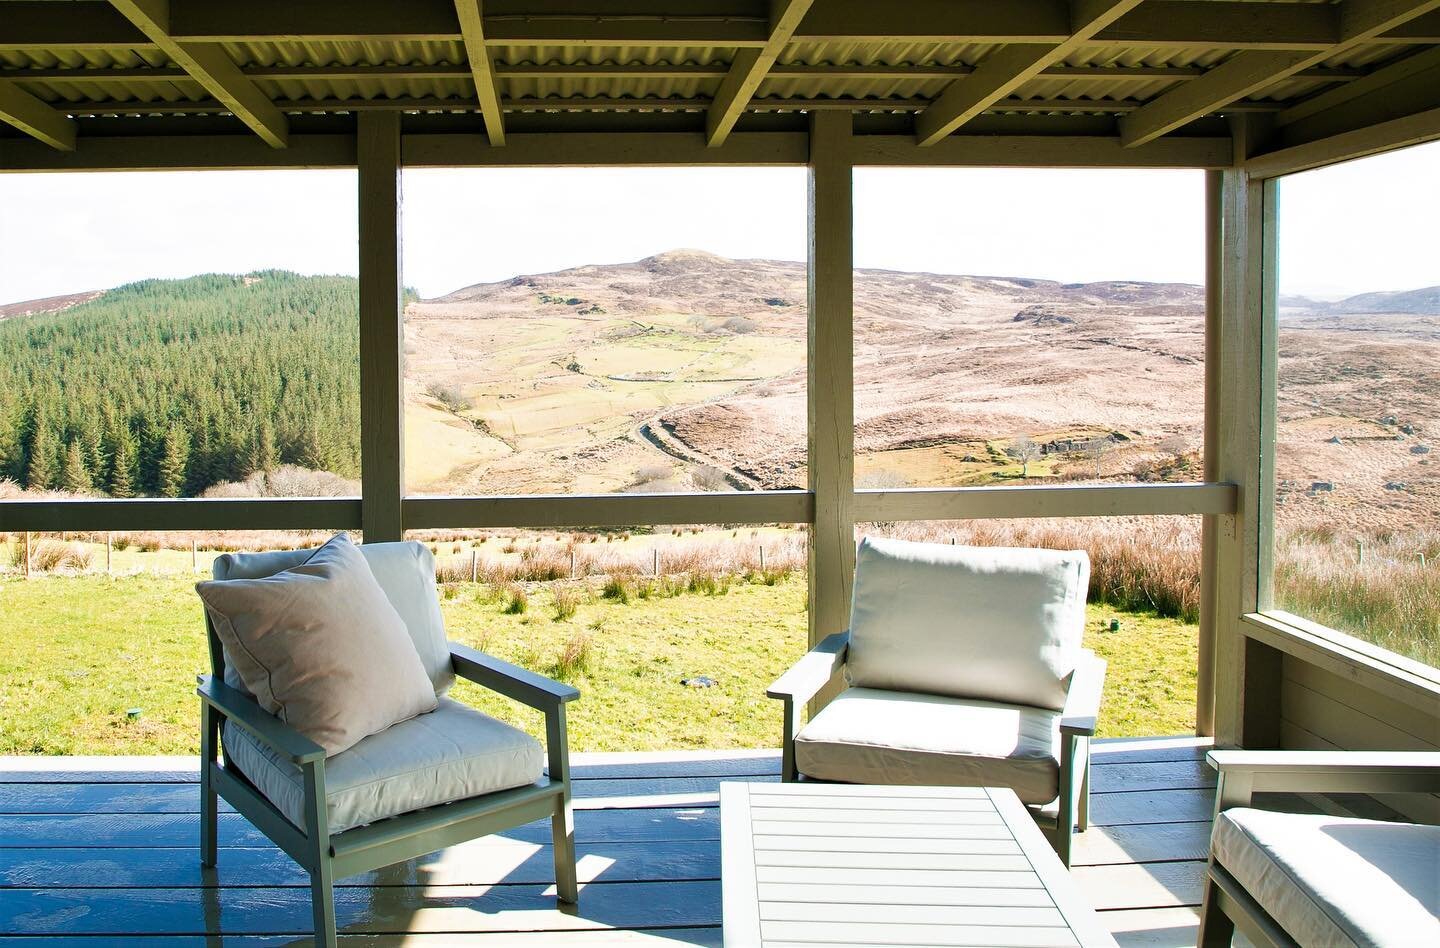 On a sunny afternoon&hellip;from this covered veranda, sit back and drink in the peace and quite and THAT VIEW! #donegal #donegalireland #ardara @wildatlanticwaypics @govisitdonegal_ @sawdaystravel @uniquehomestays @uniqueirishhomes #beautifuldestina